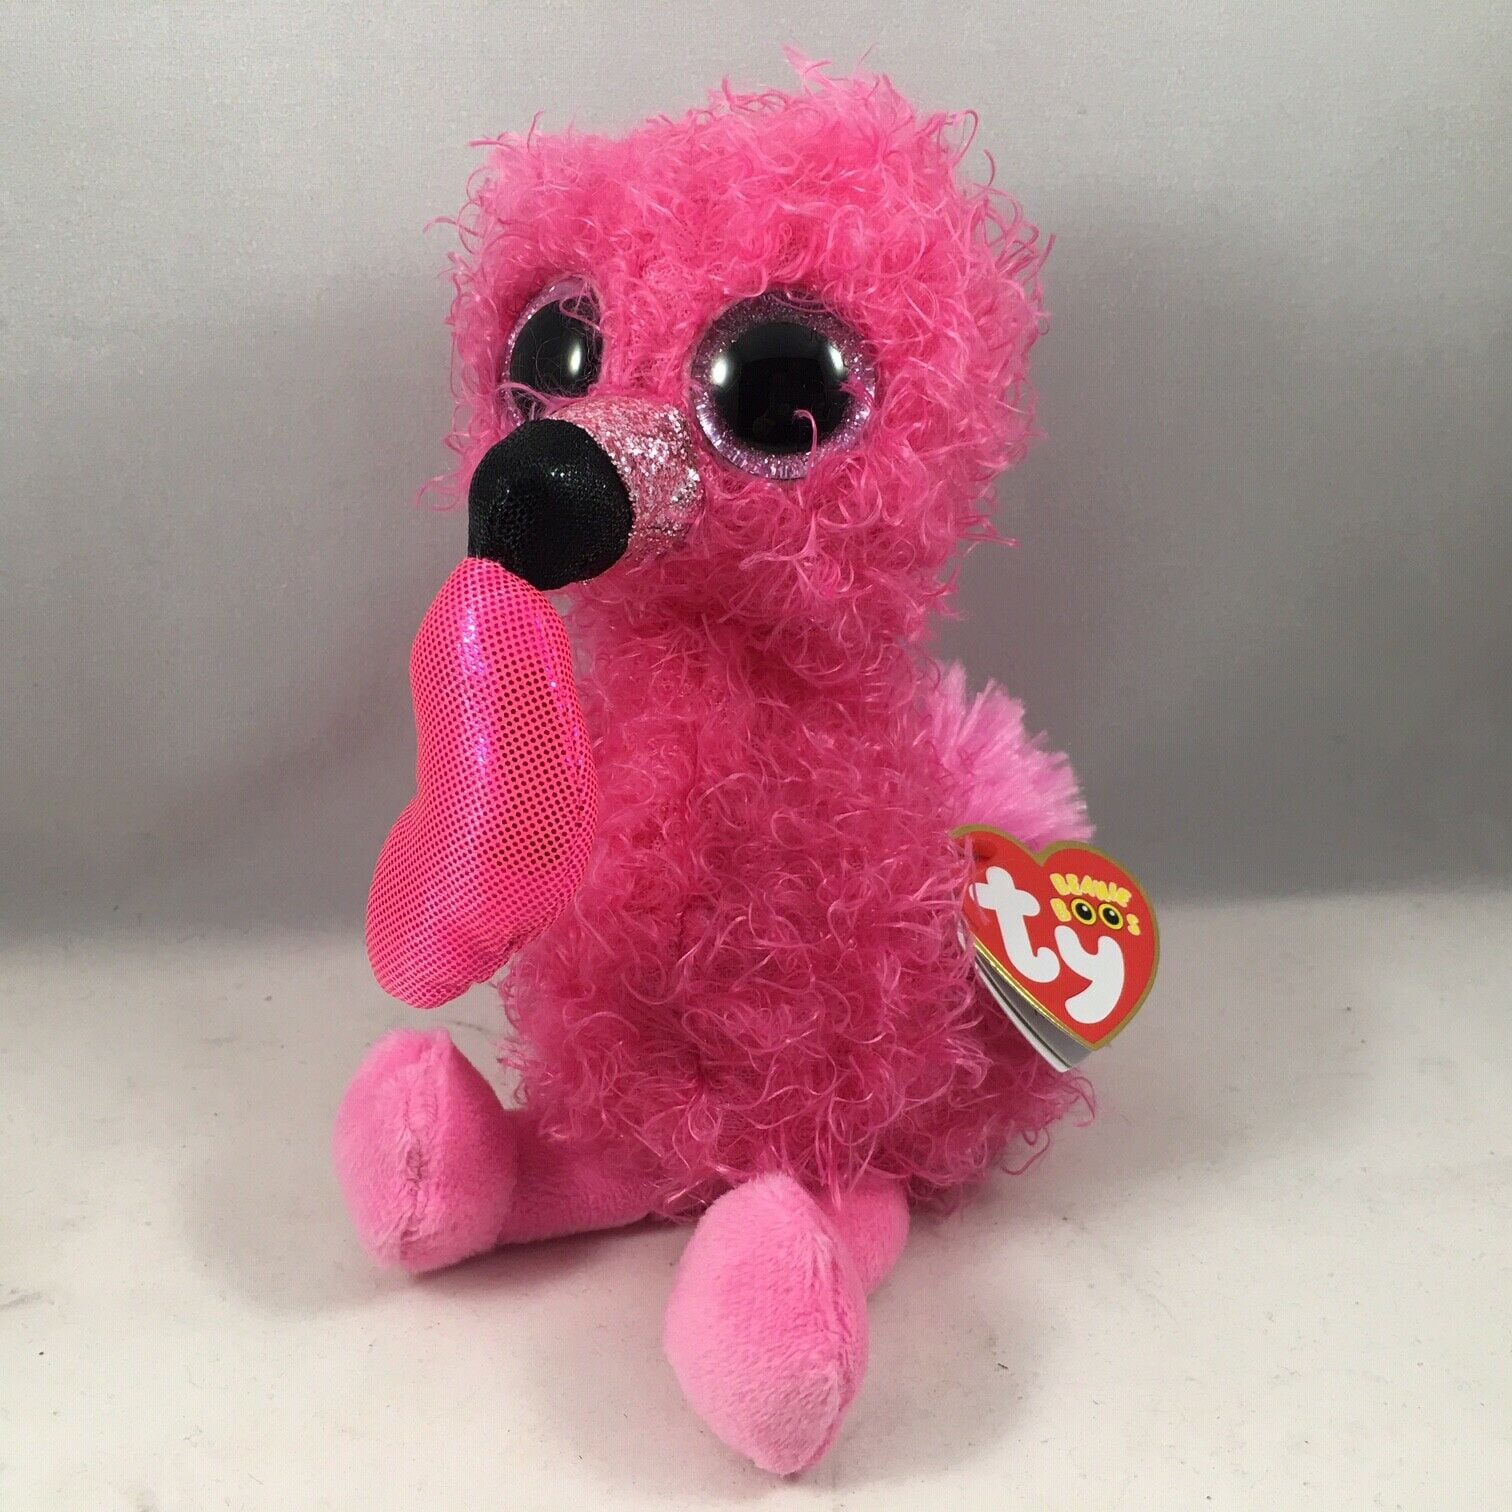 Ty Beanie Boos 6" DARLING the 2020 Valentine's Day Unicorn Plush Toy Gift MWMTs 